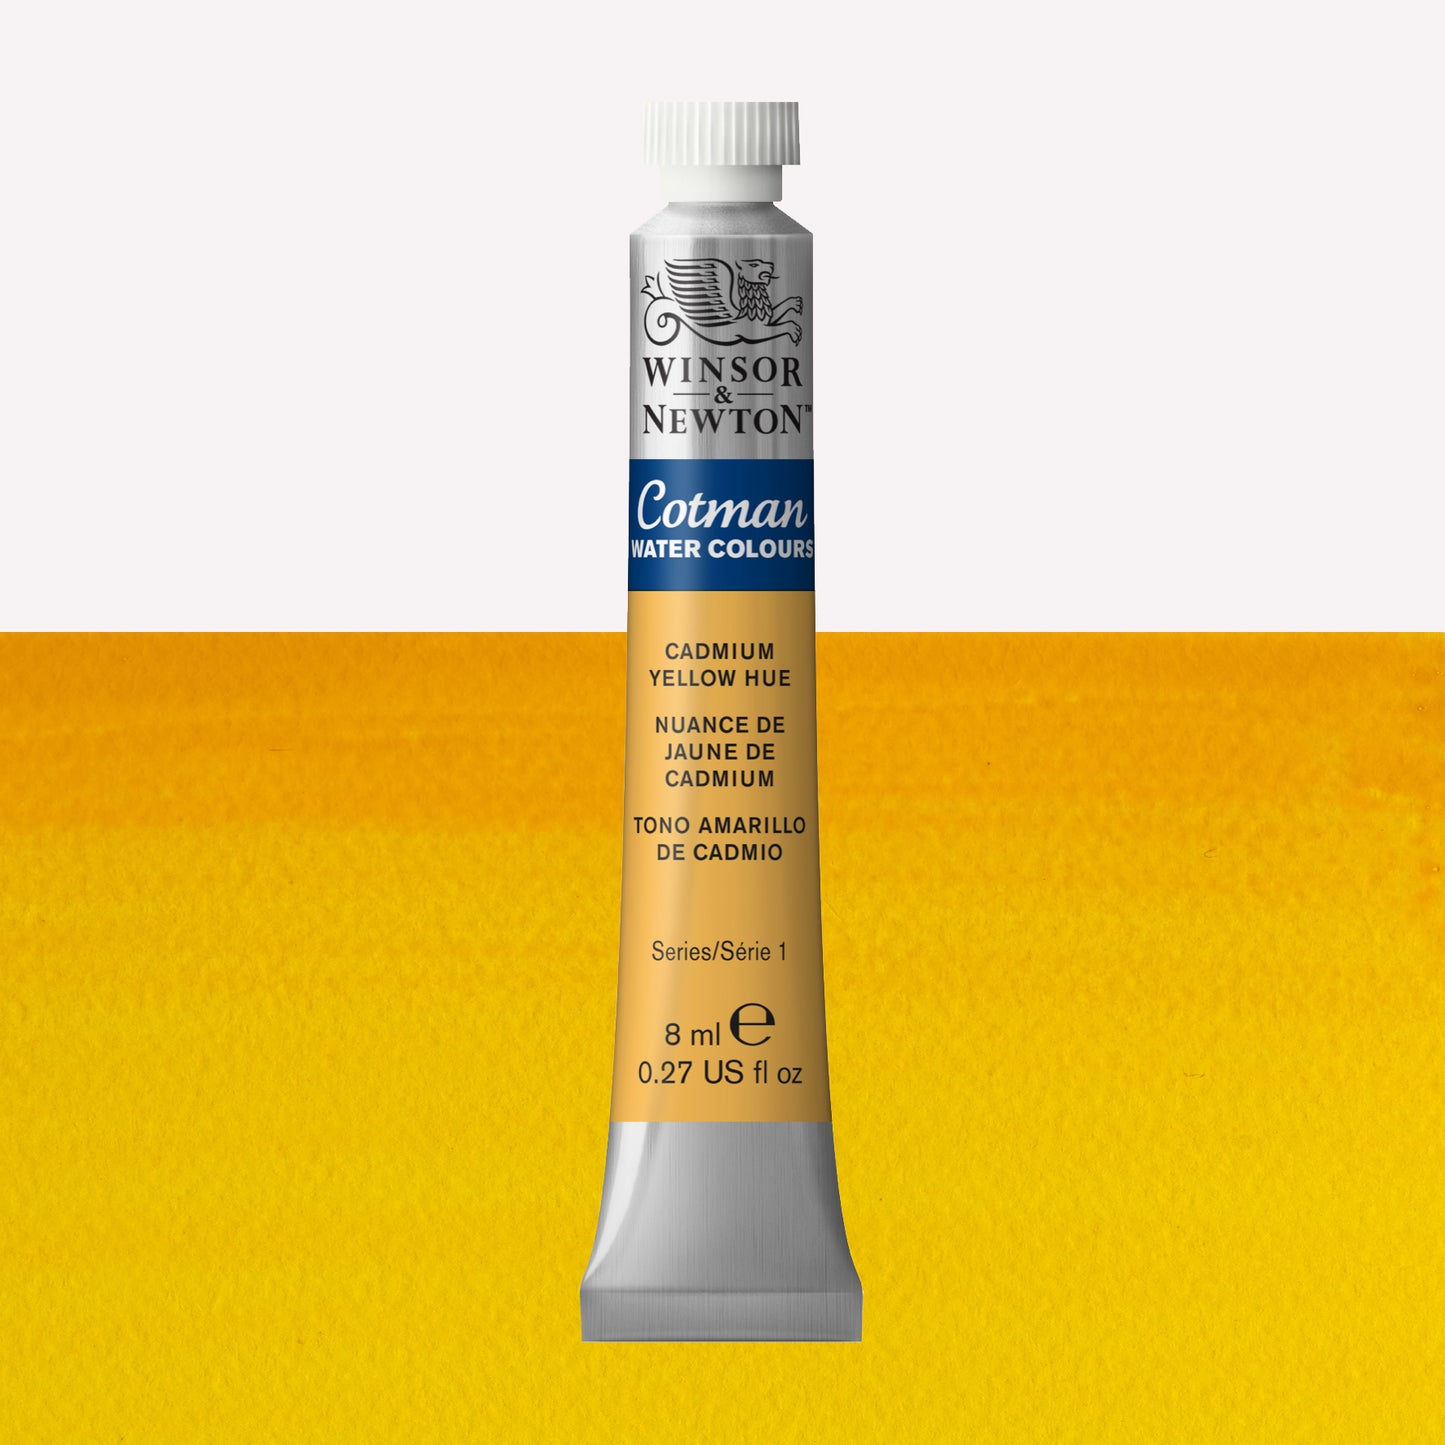 Winsor & Newton Cotman watercolour paint packaged in 8ml silver tubes with a white lid in the shade Cadmium Yellow Hue, over a mid-range yellow colour swatch.